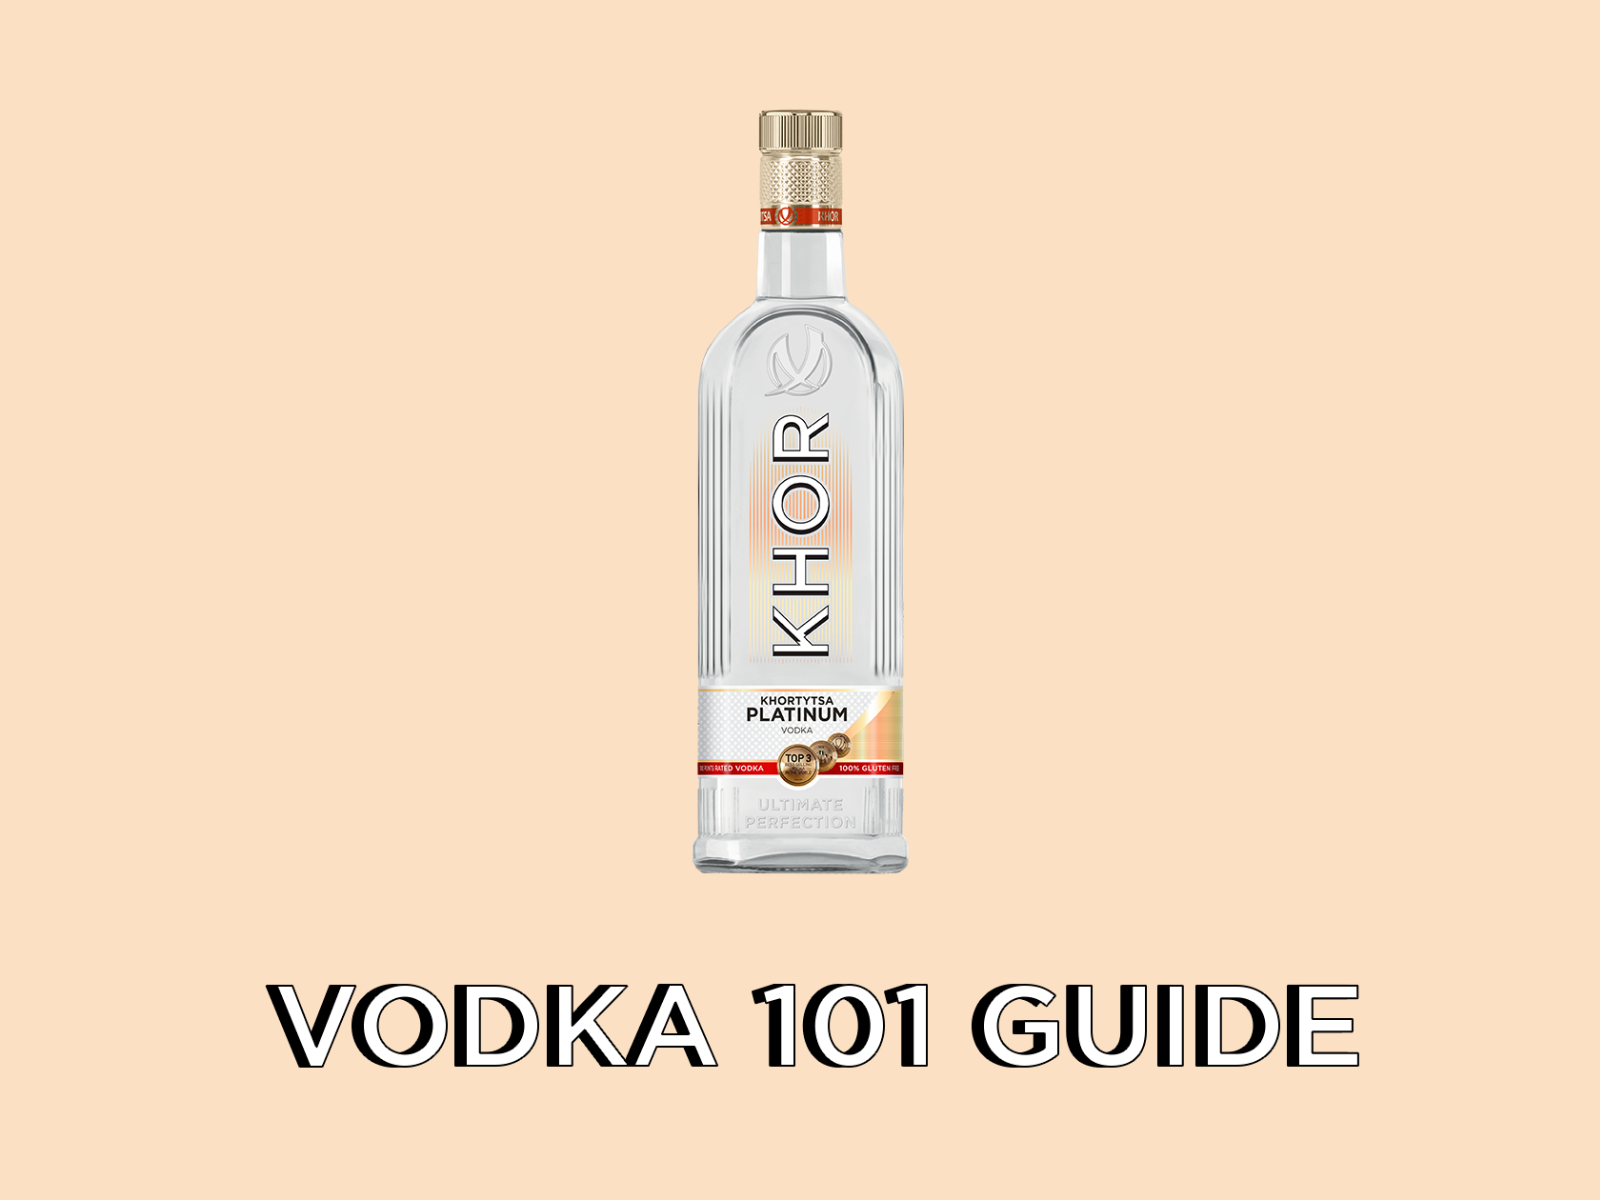 The Complete Guide to VODKA - Everything you need to know about VODKA